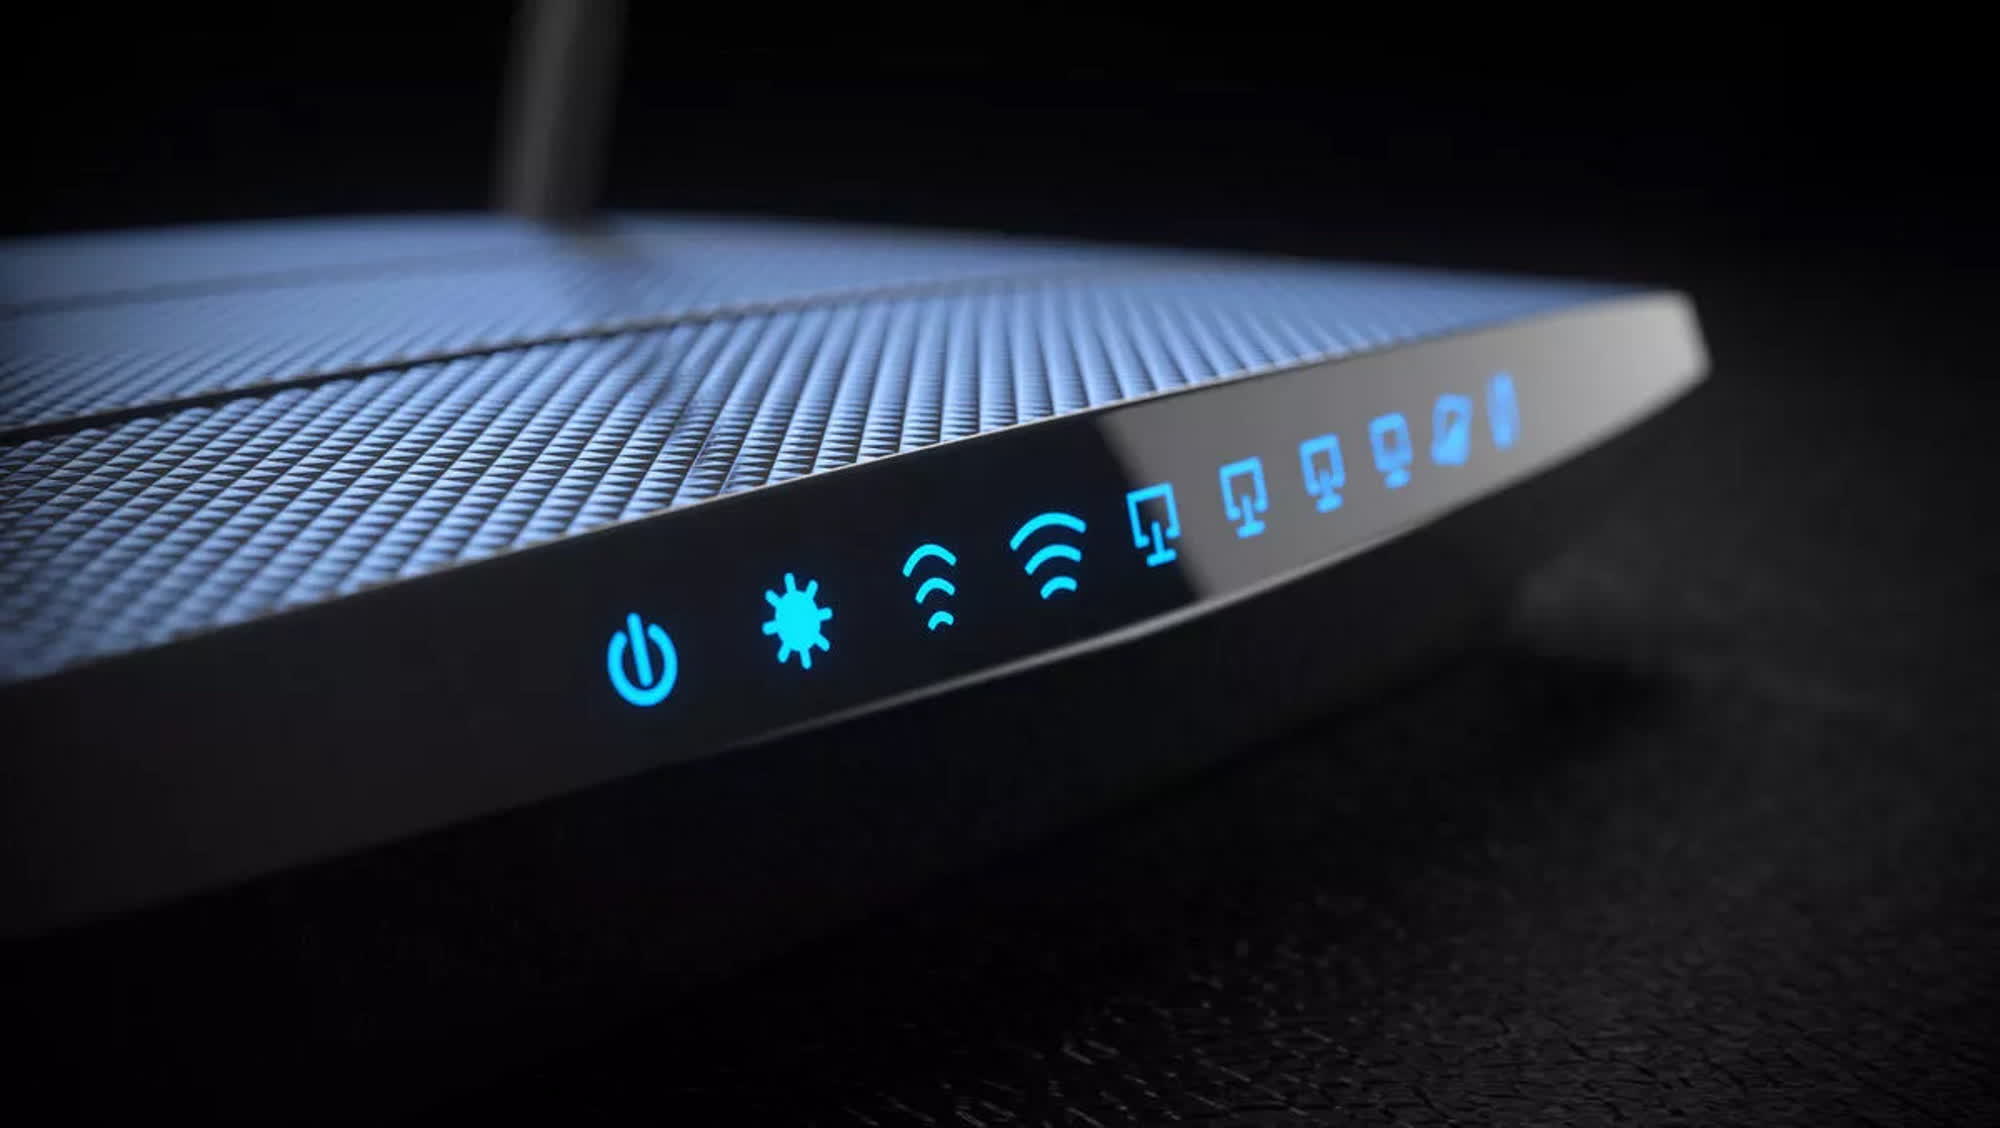 Chinese state hackers are infecting TP-Link routers with custom, malicious firmware